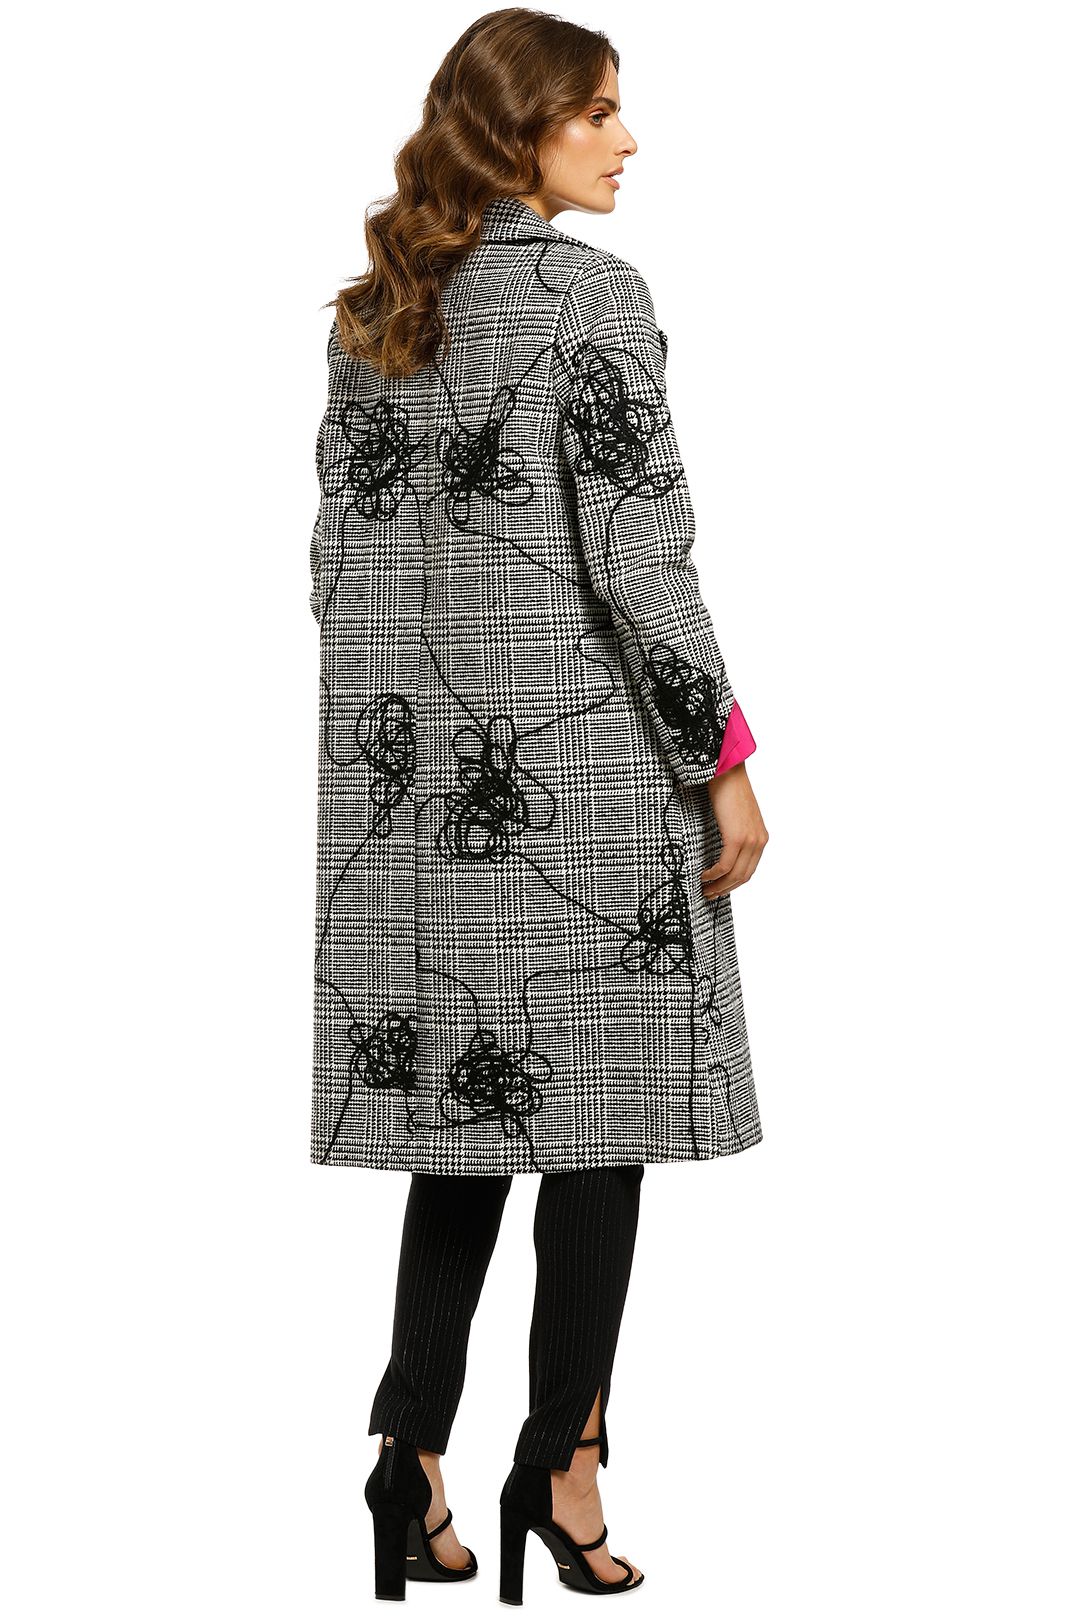 Curate-by-Trelise-Cooper-Button-Up-Coat-Check-Back